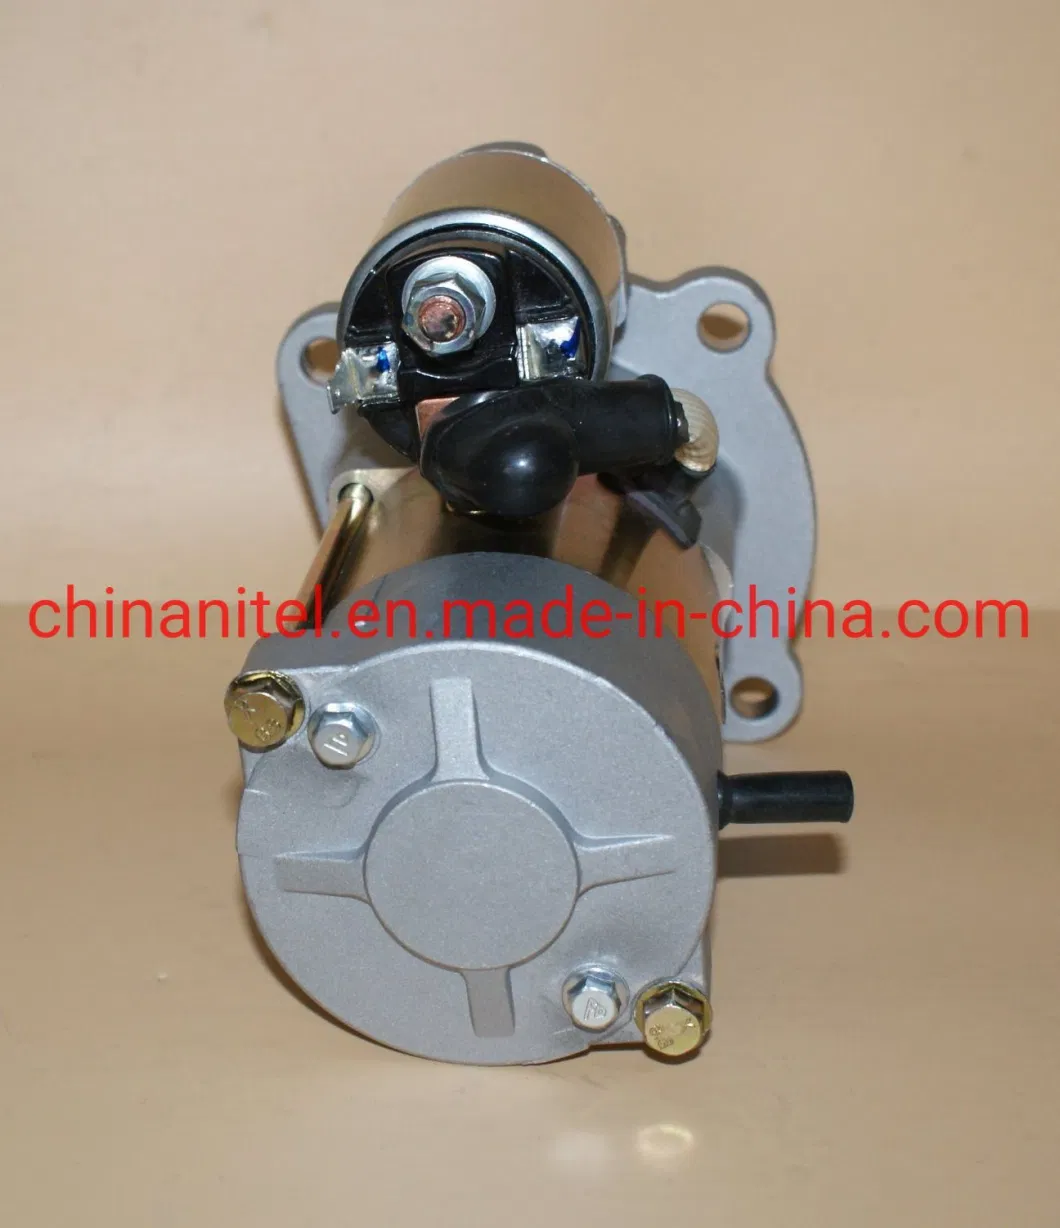 Nitai Electric Starters Factory 35mt Delco Remy Starter Motorchina12V 2.5kw 5266969 5311304 Engine Parts Starter Motor for Isf 2.8 Cummins Engines